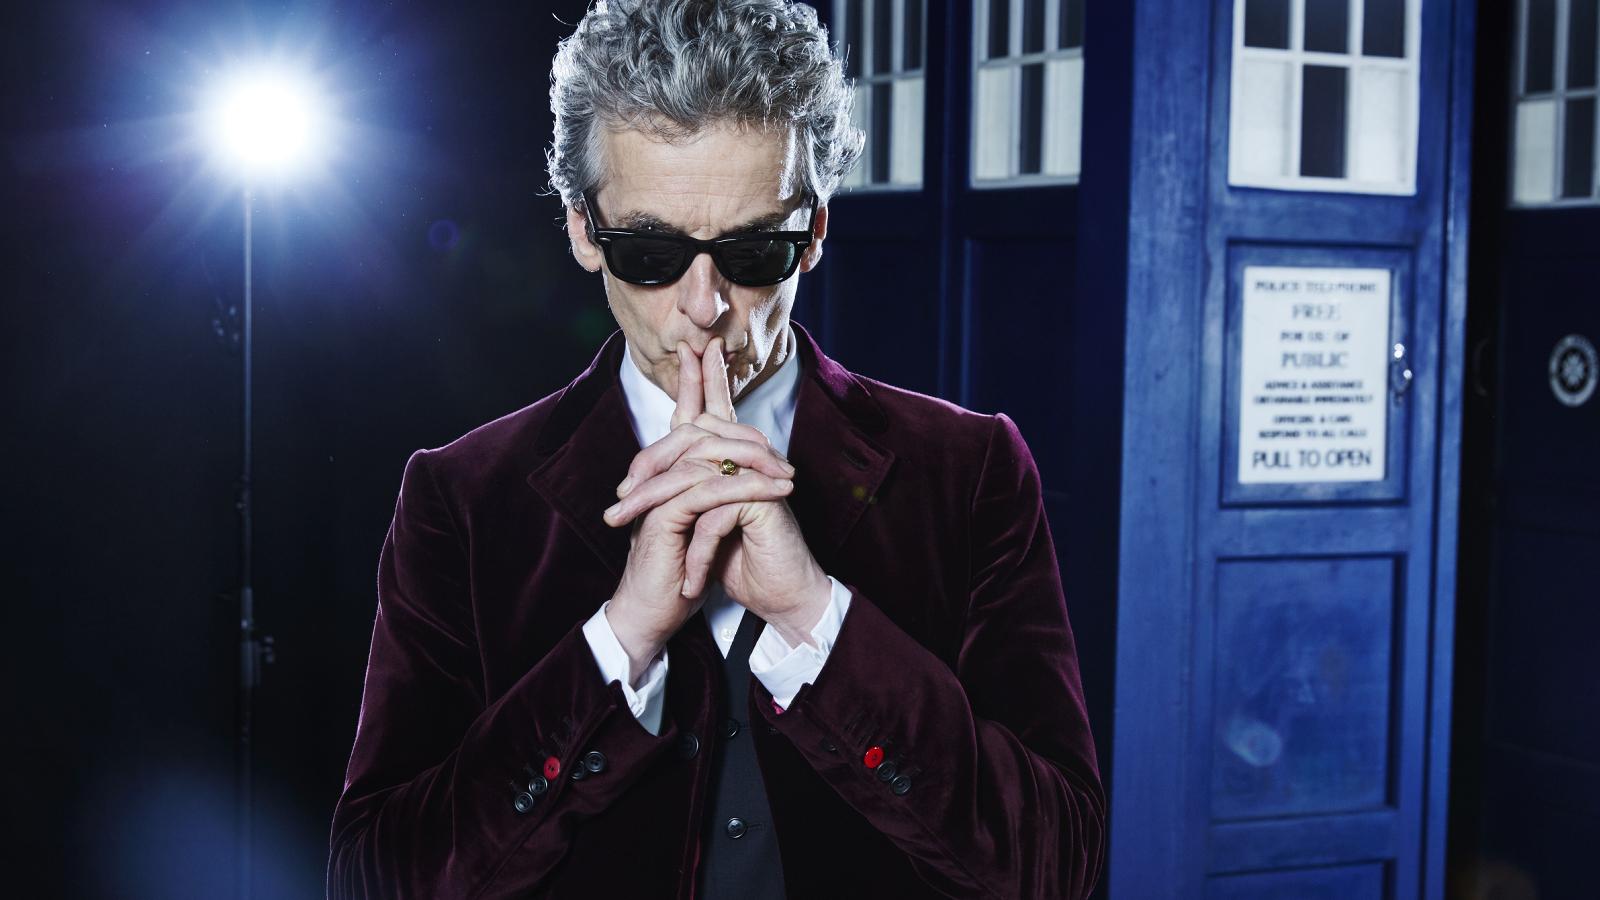 Peter Capaldi as the Twelfth Doctor in a promotional still for Doctor Who.